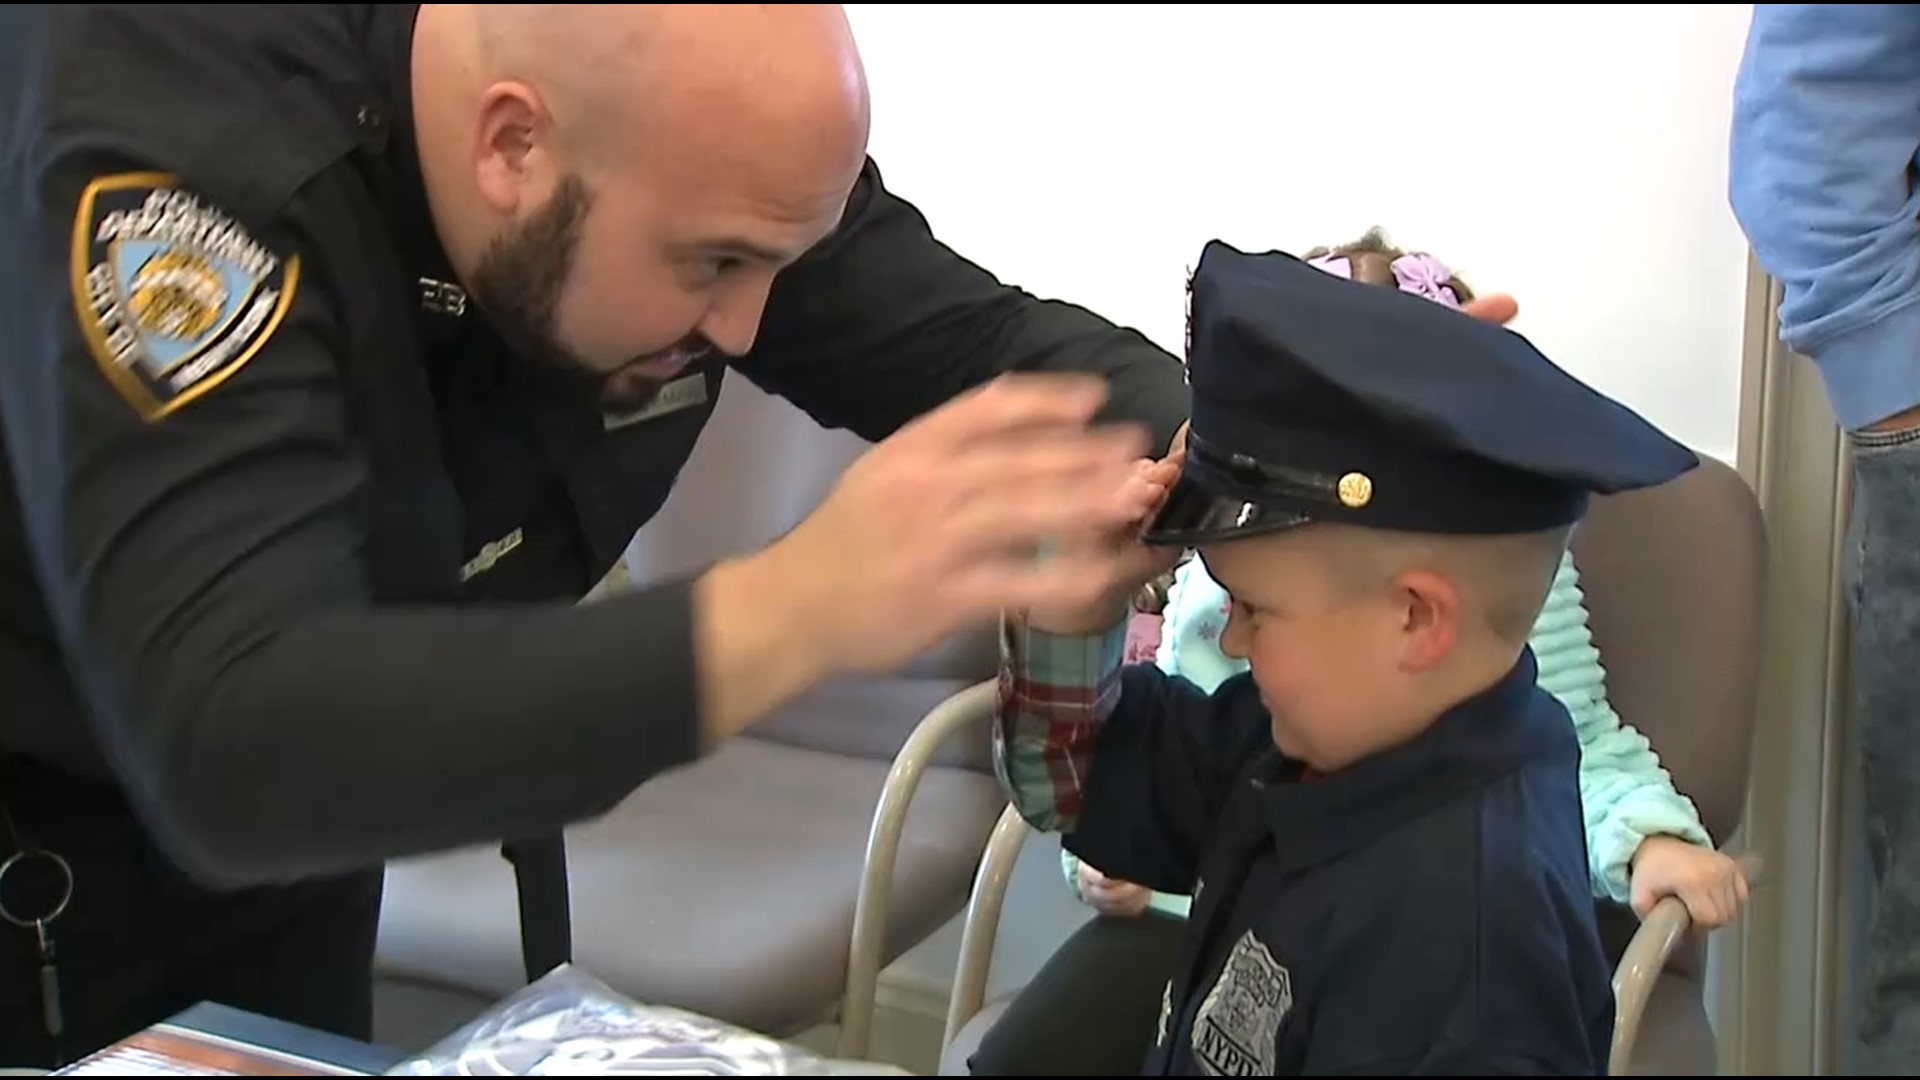 Eight-year-old Isaac Pruitt's dream is to become a police officer.